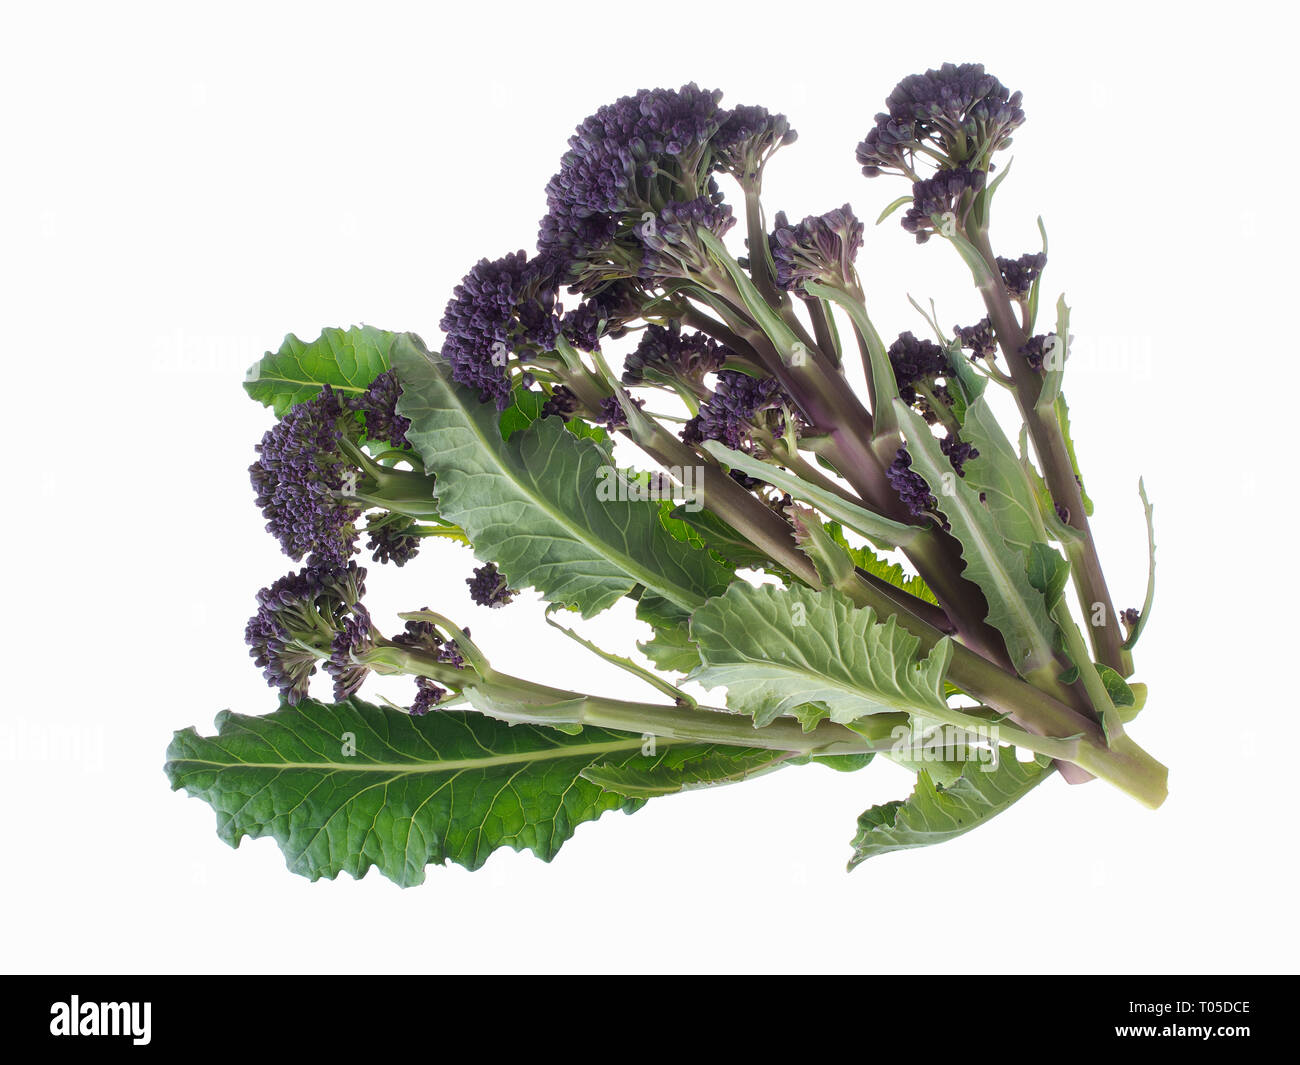 Early purple sprouting broccoli spring vegetable, isolated on white. Overhead view. Stock Photo